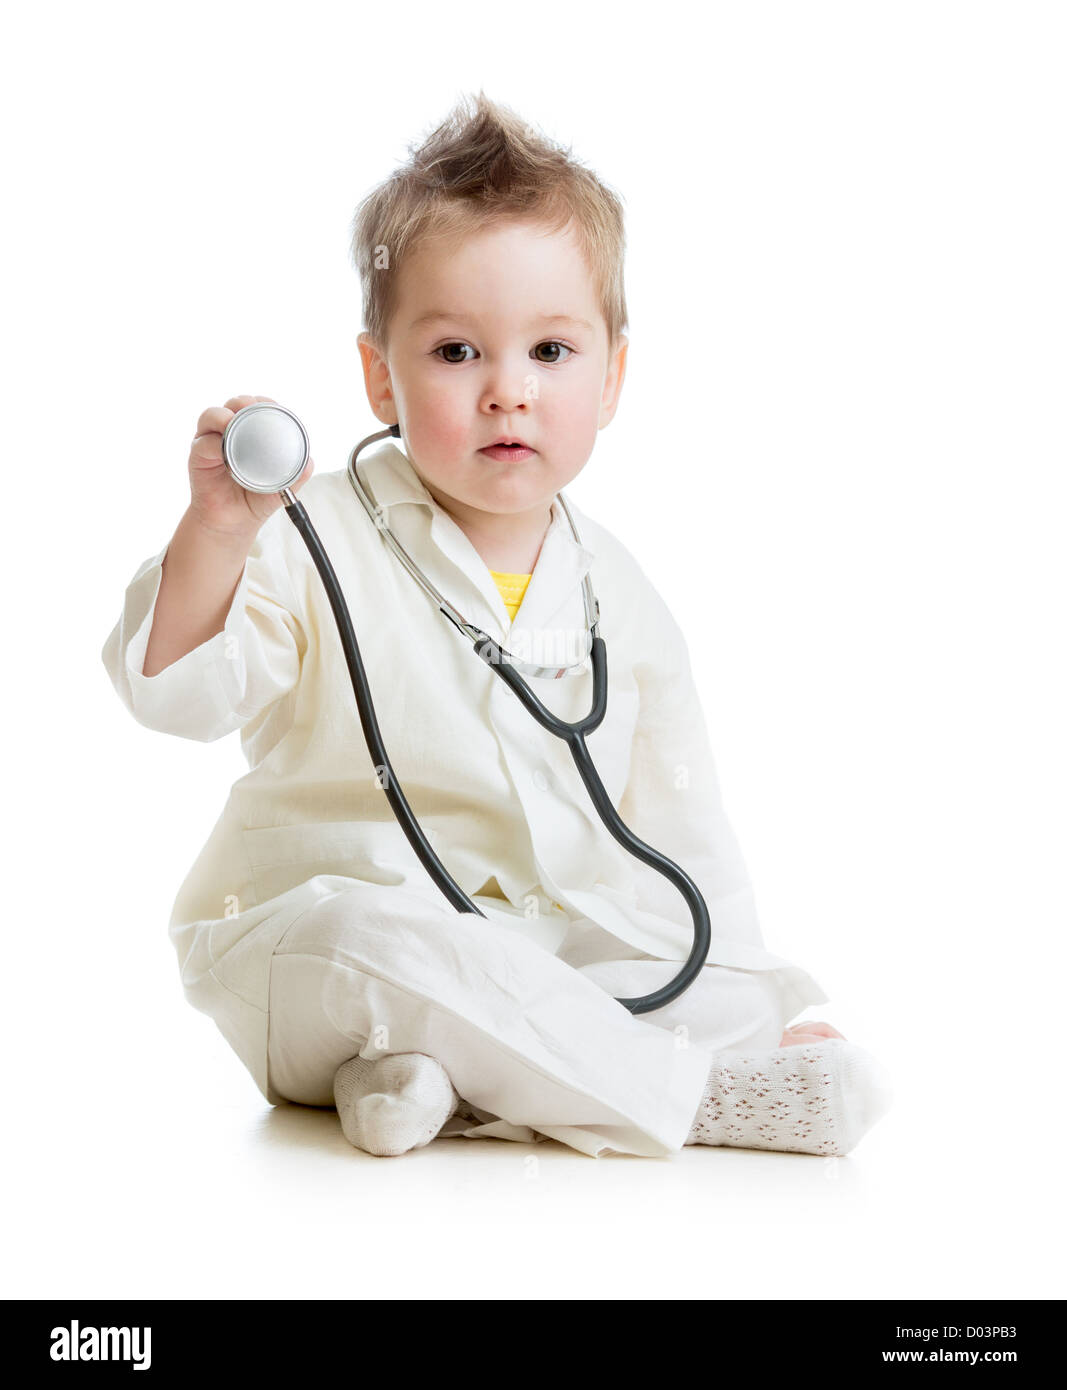 kid or child playing doctor with stethoscope isolated Stock Photo